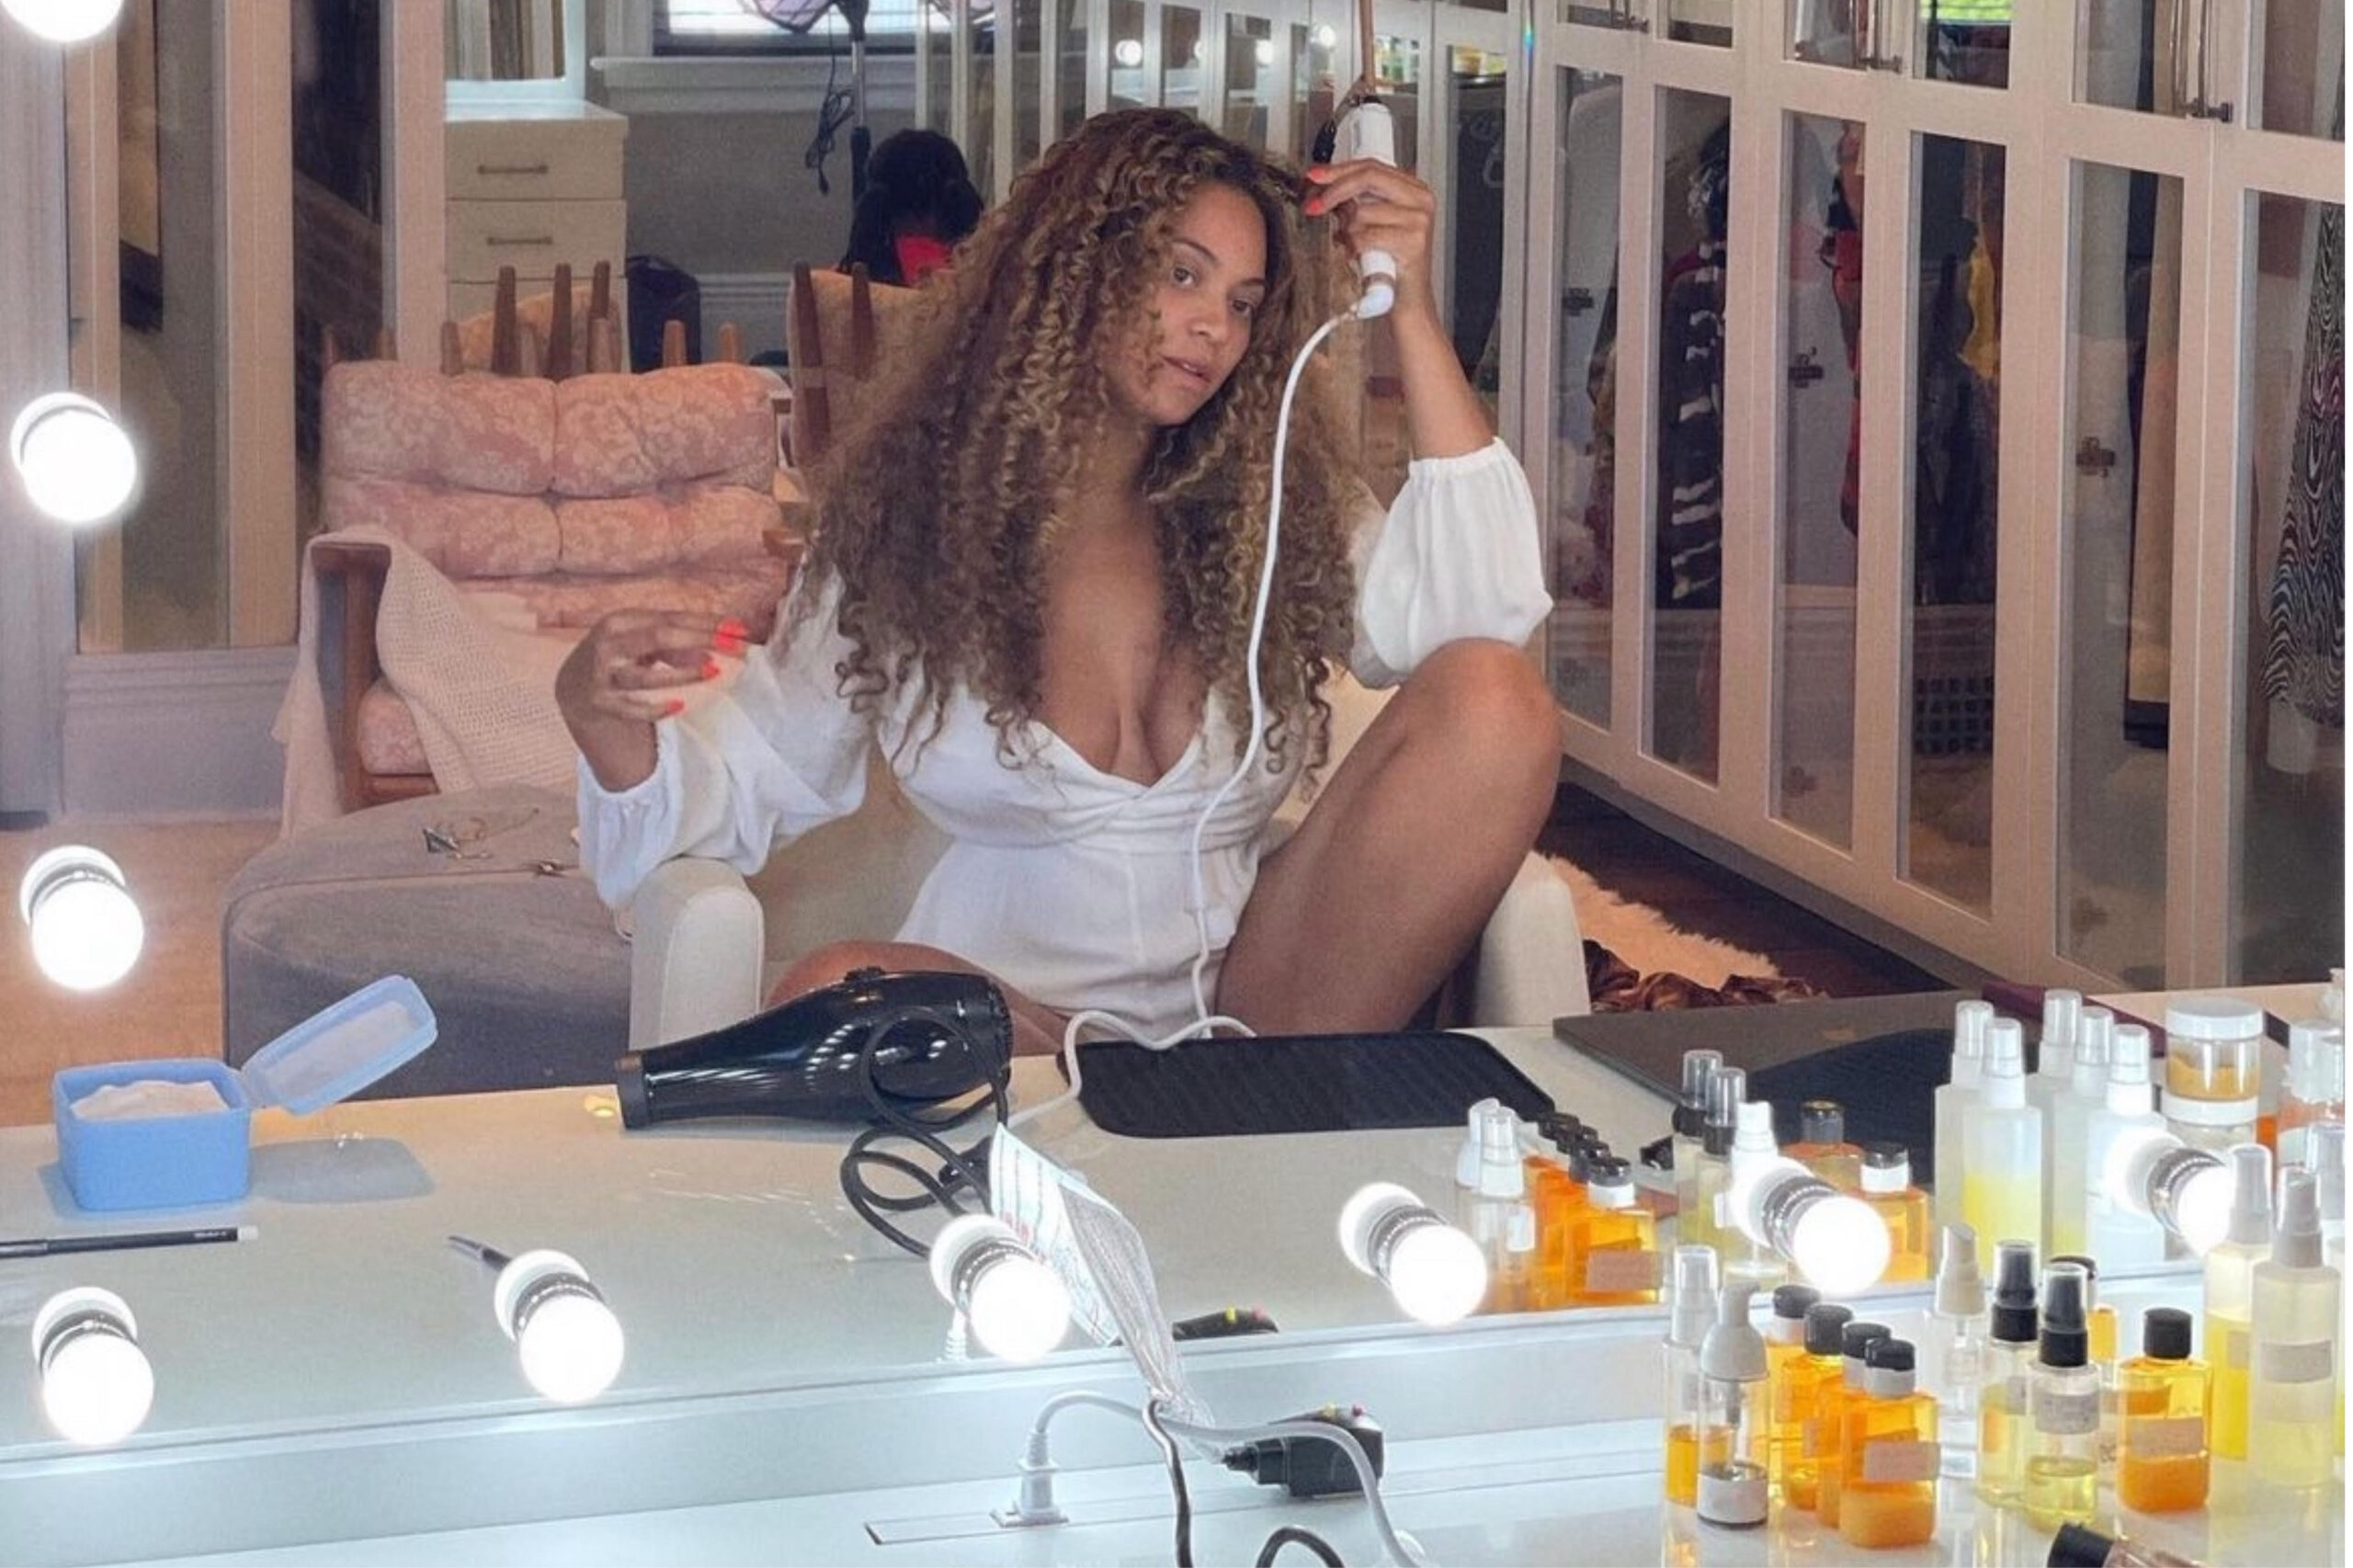 WILL BEYONCE’S NEW HAIR CARE LINE CÉCRED LIVE UP TO IT’S HYPE?